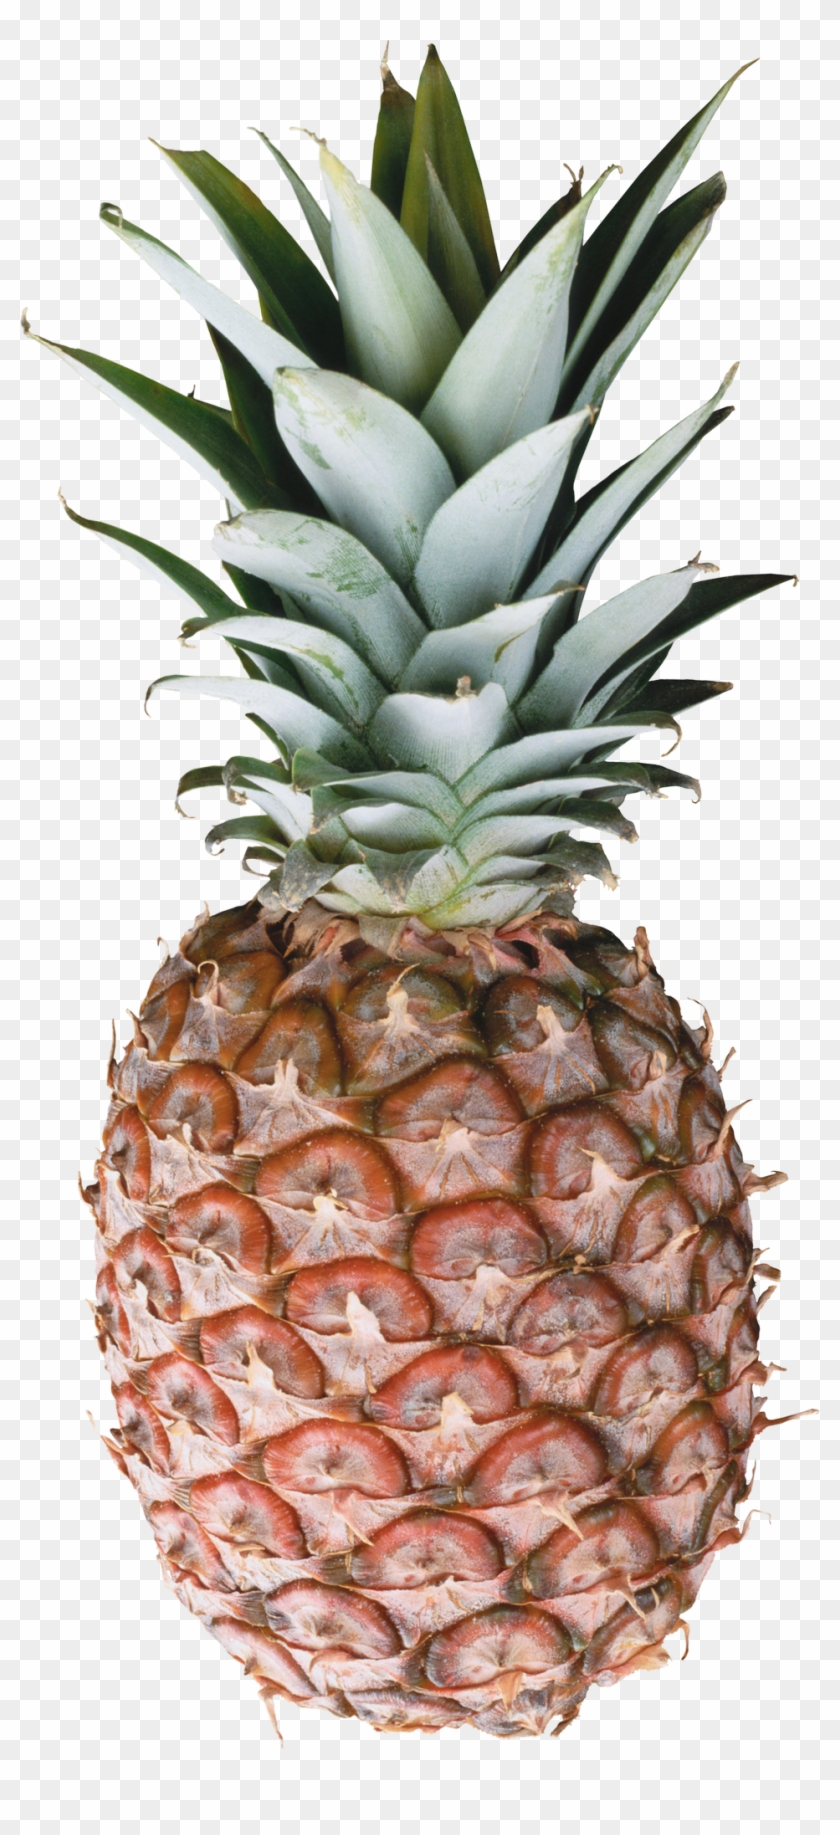 Pineapple - Pineapple And Marble Clipart #599266